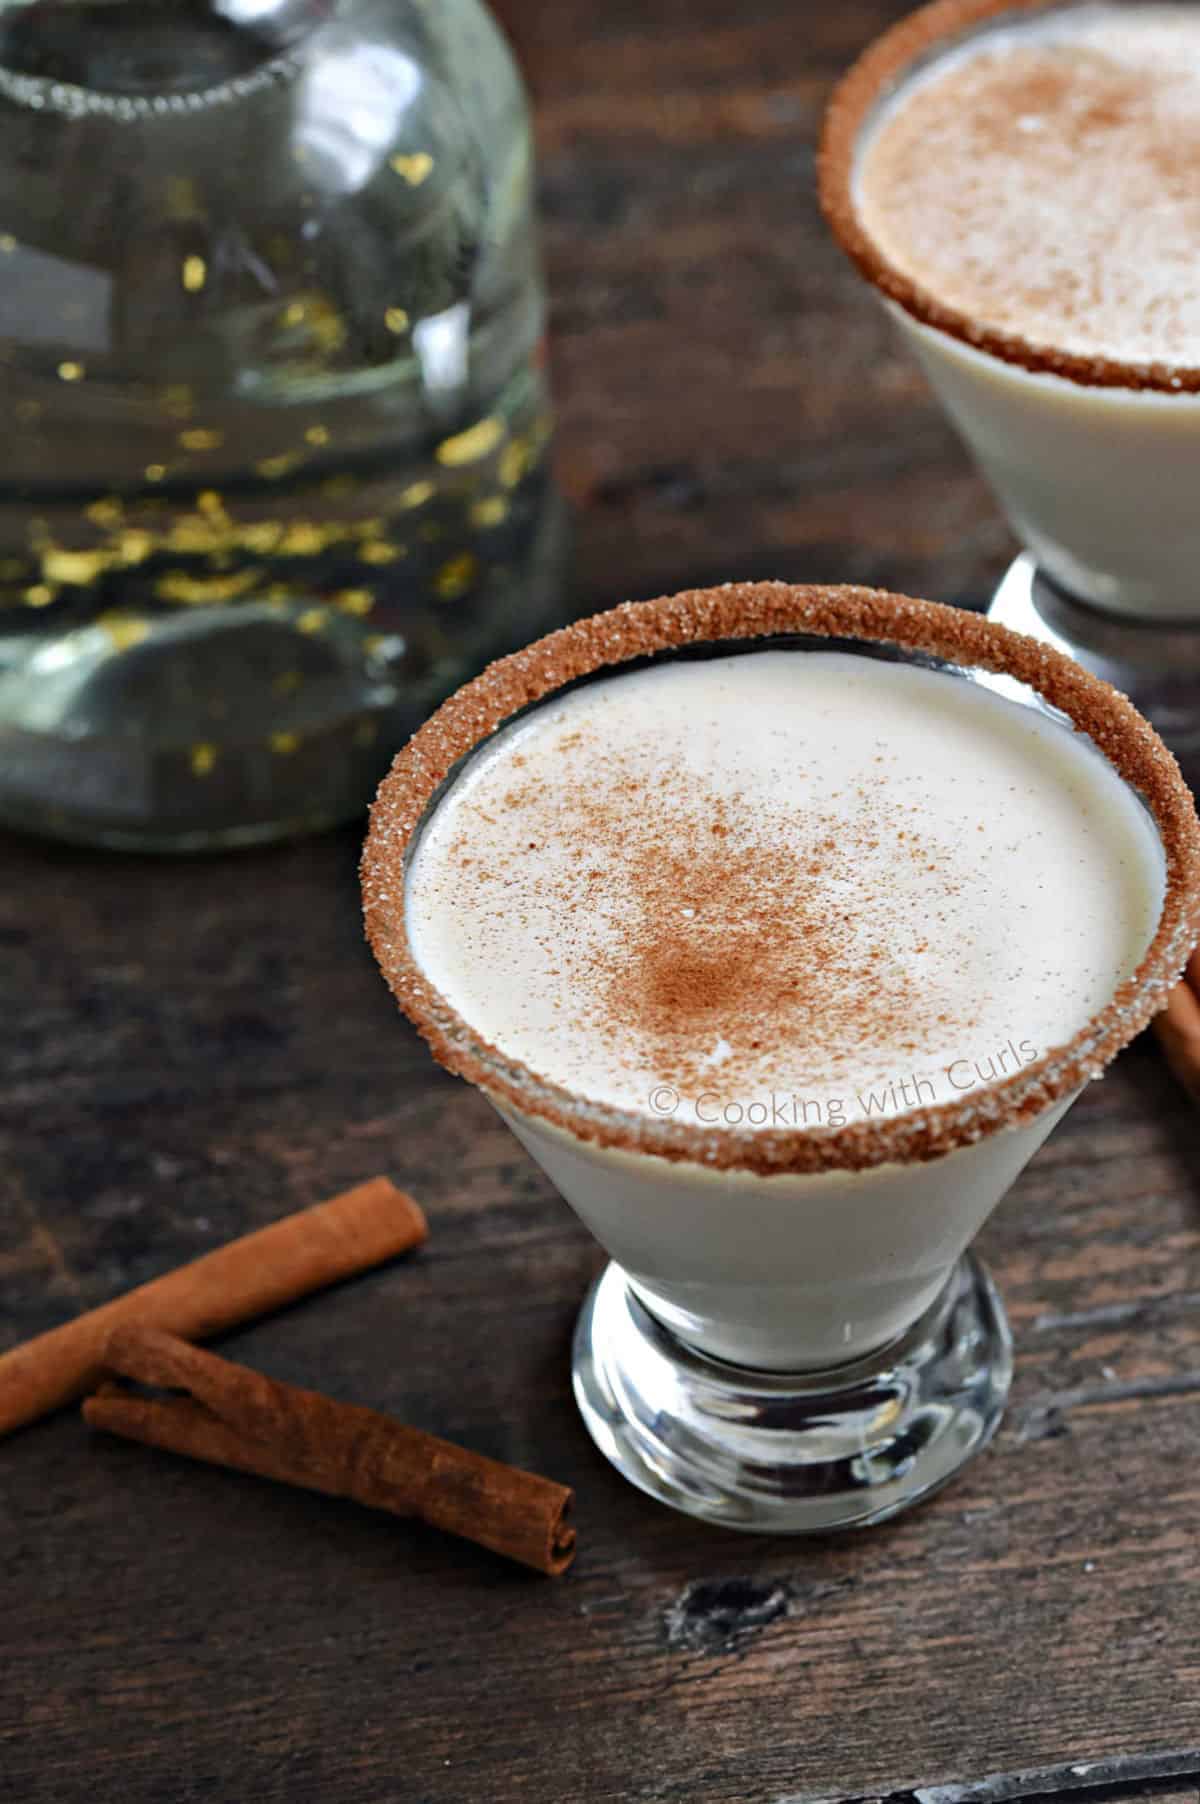 Snickerdoodle Martini with Goldschlager dusted with cinnamon. 